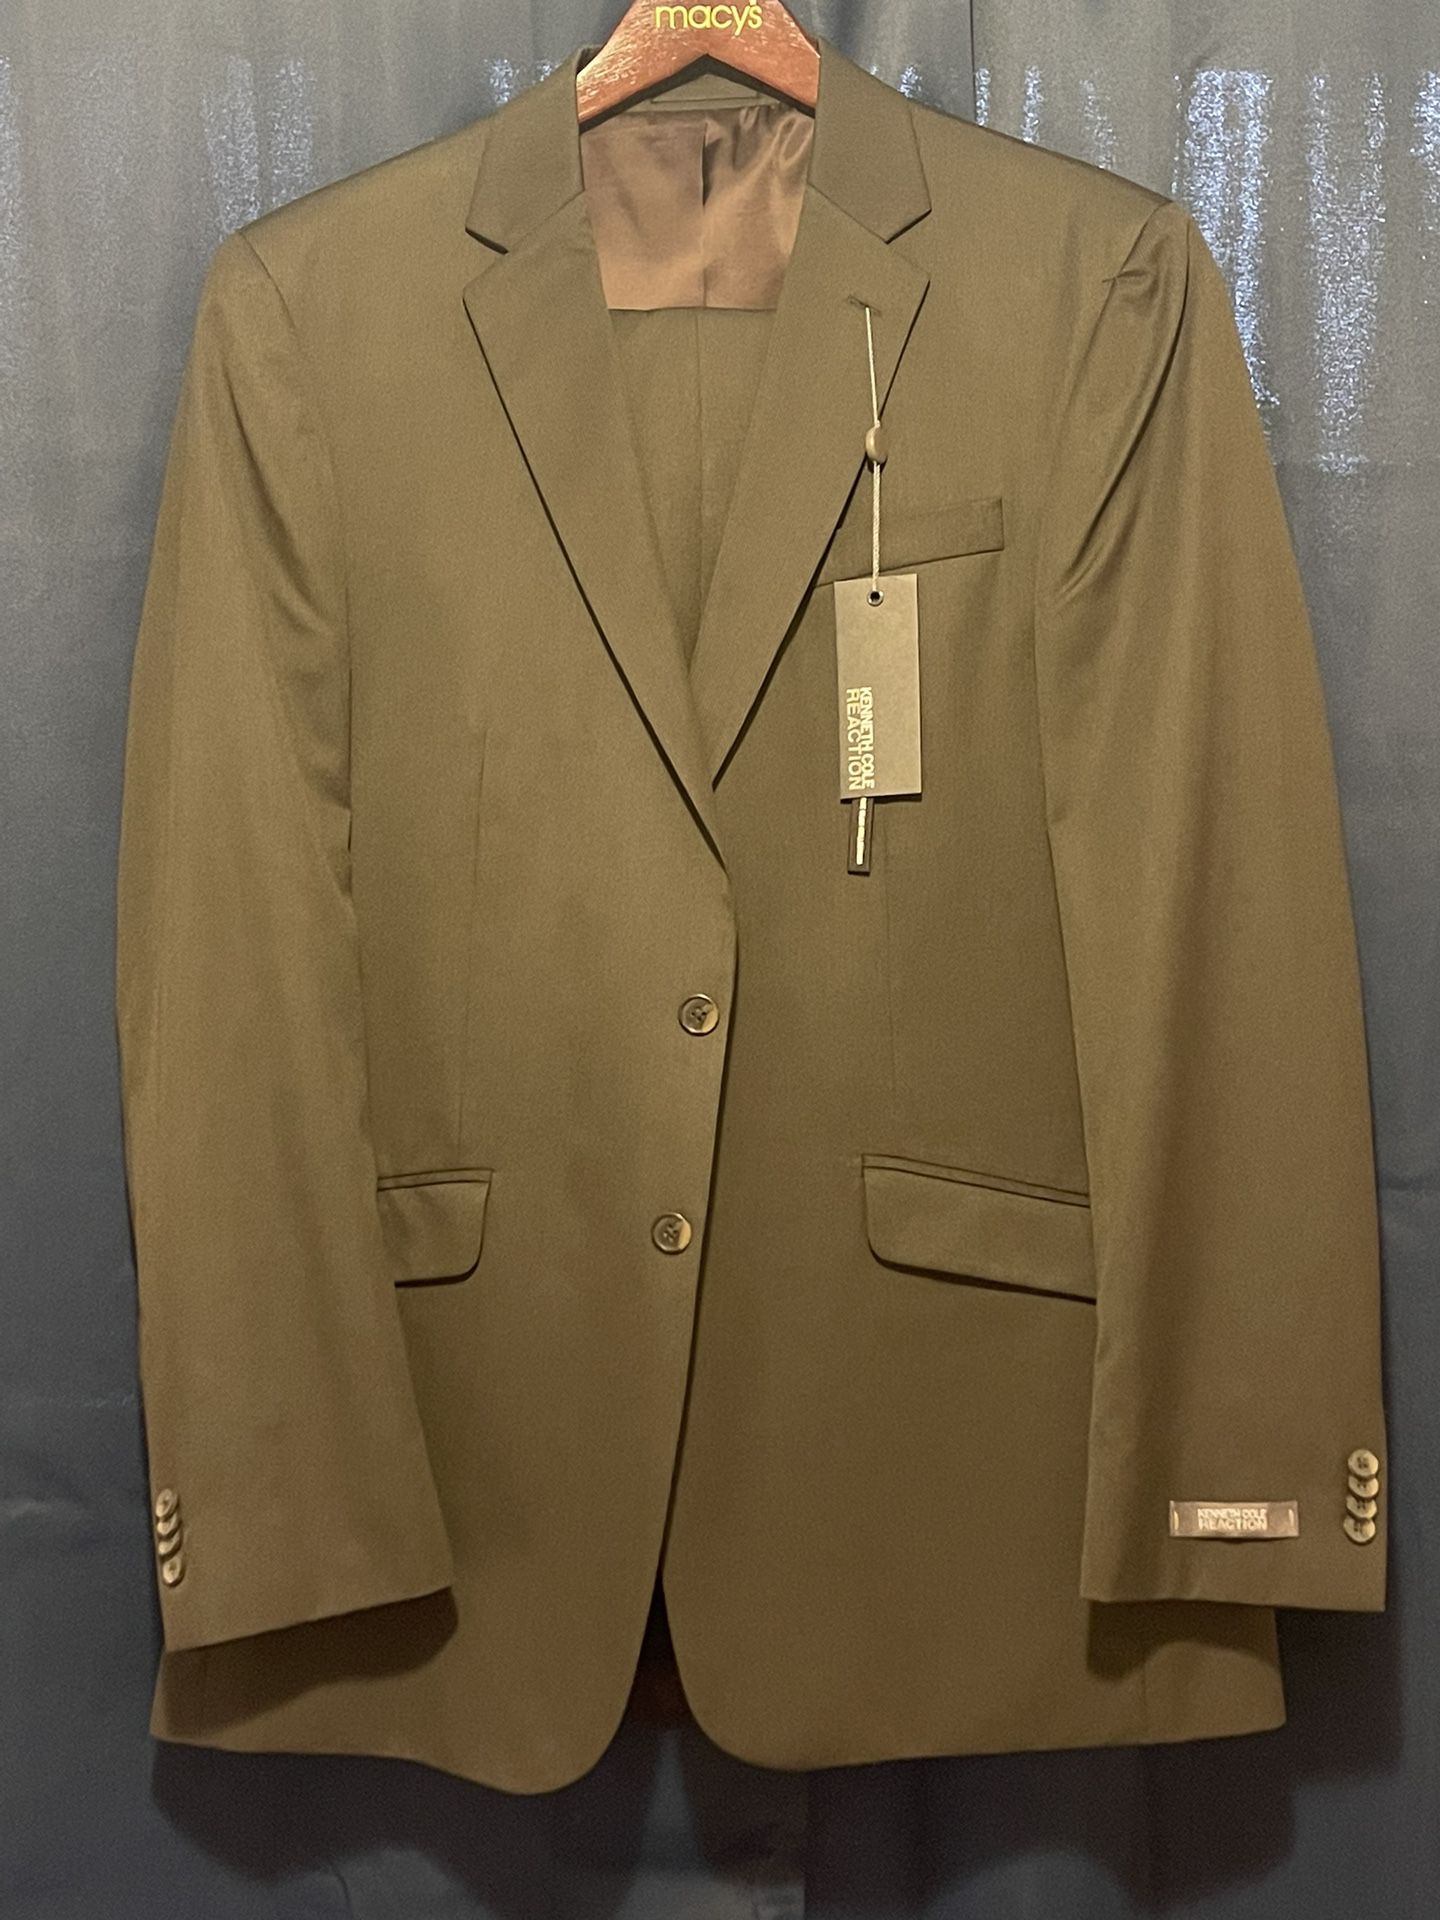 Brown Striped Kenneth Cole Reaction Suit